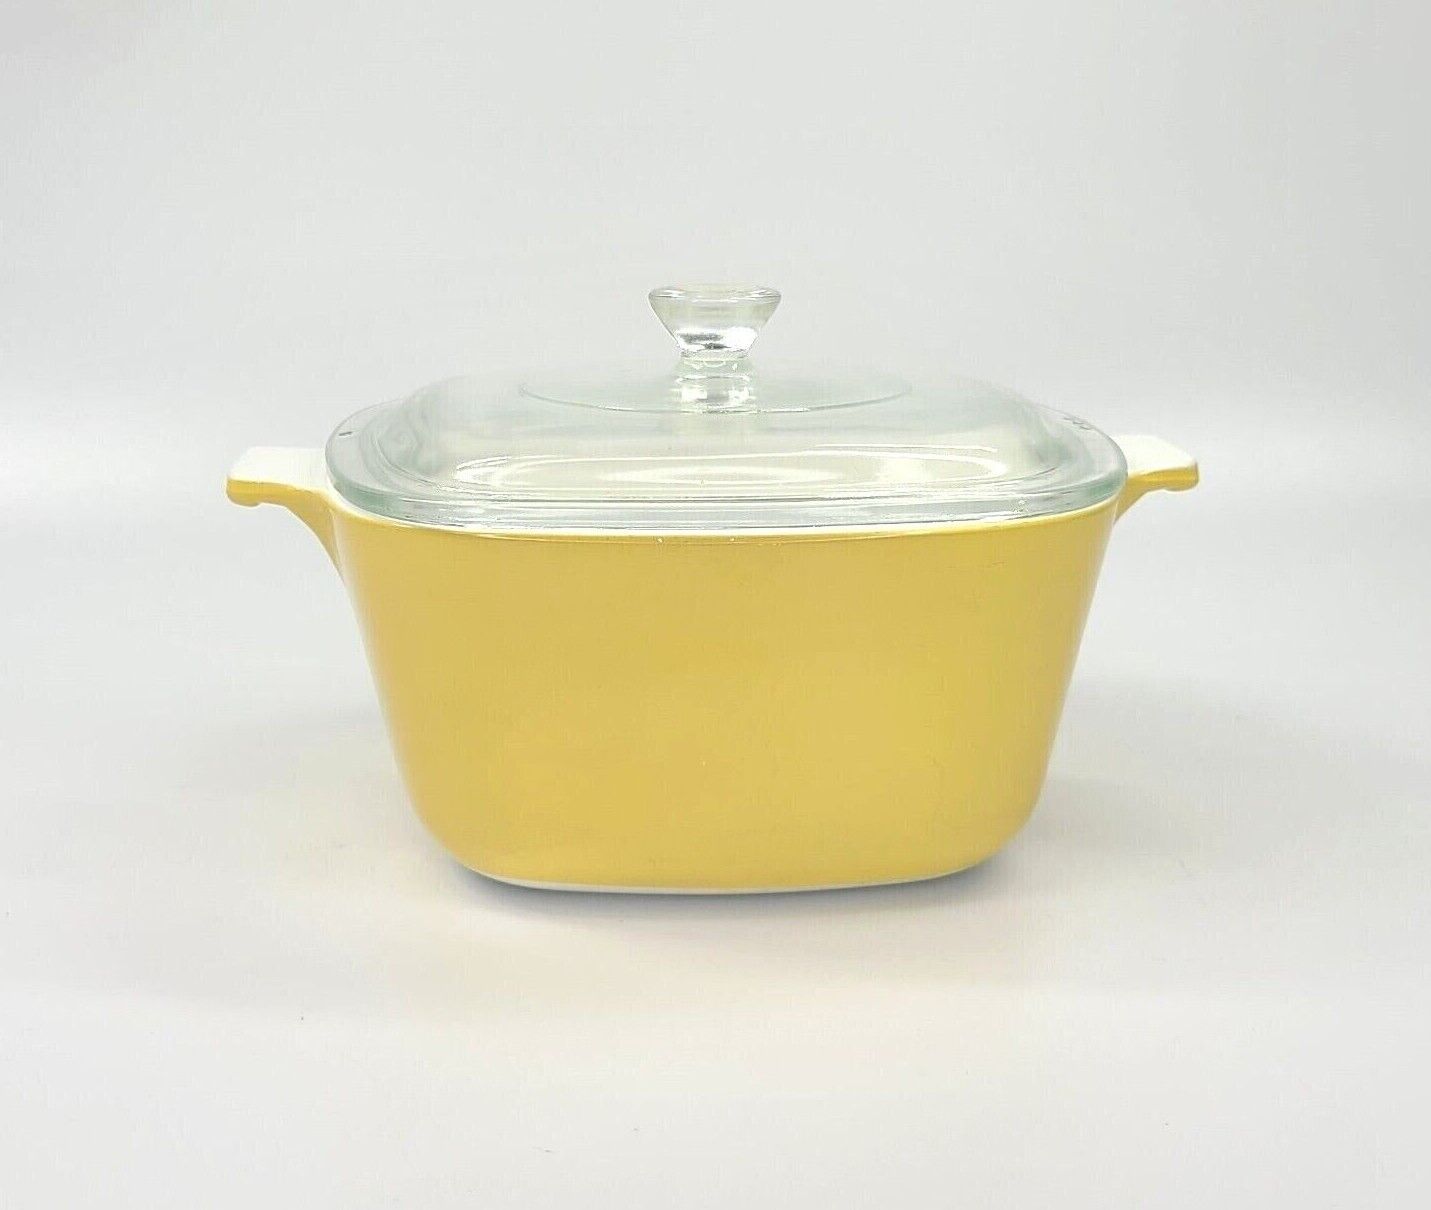 Vintage Harvest Gold Square Corning Ware Casserole With Lid 1 3/4 QT. P-1 3/4-B 